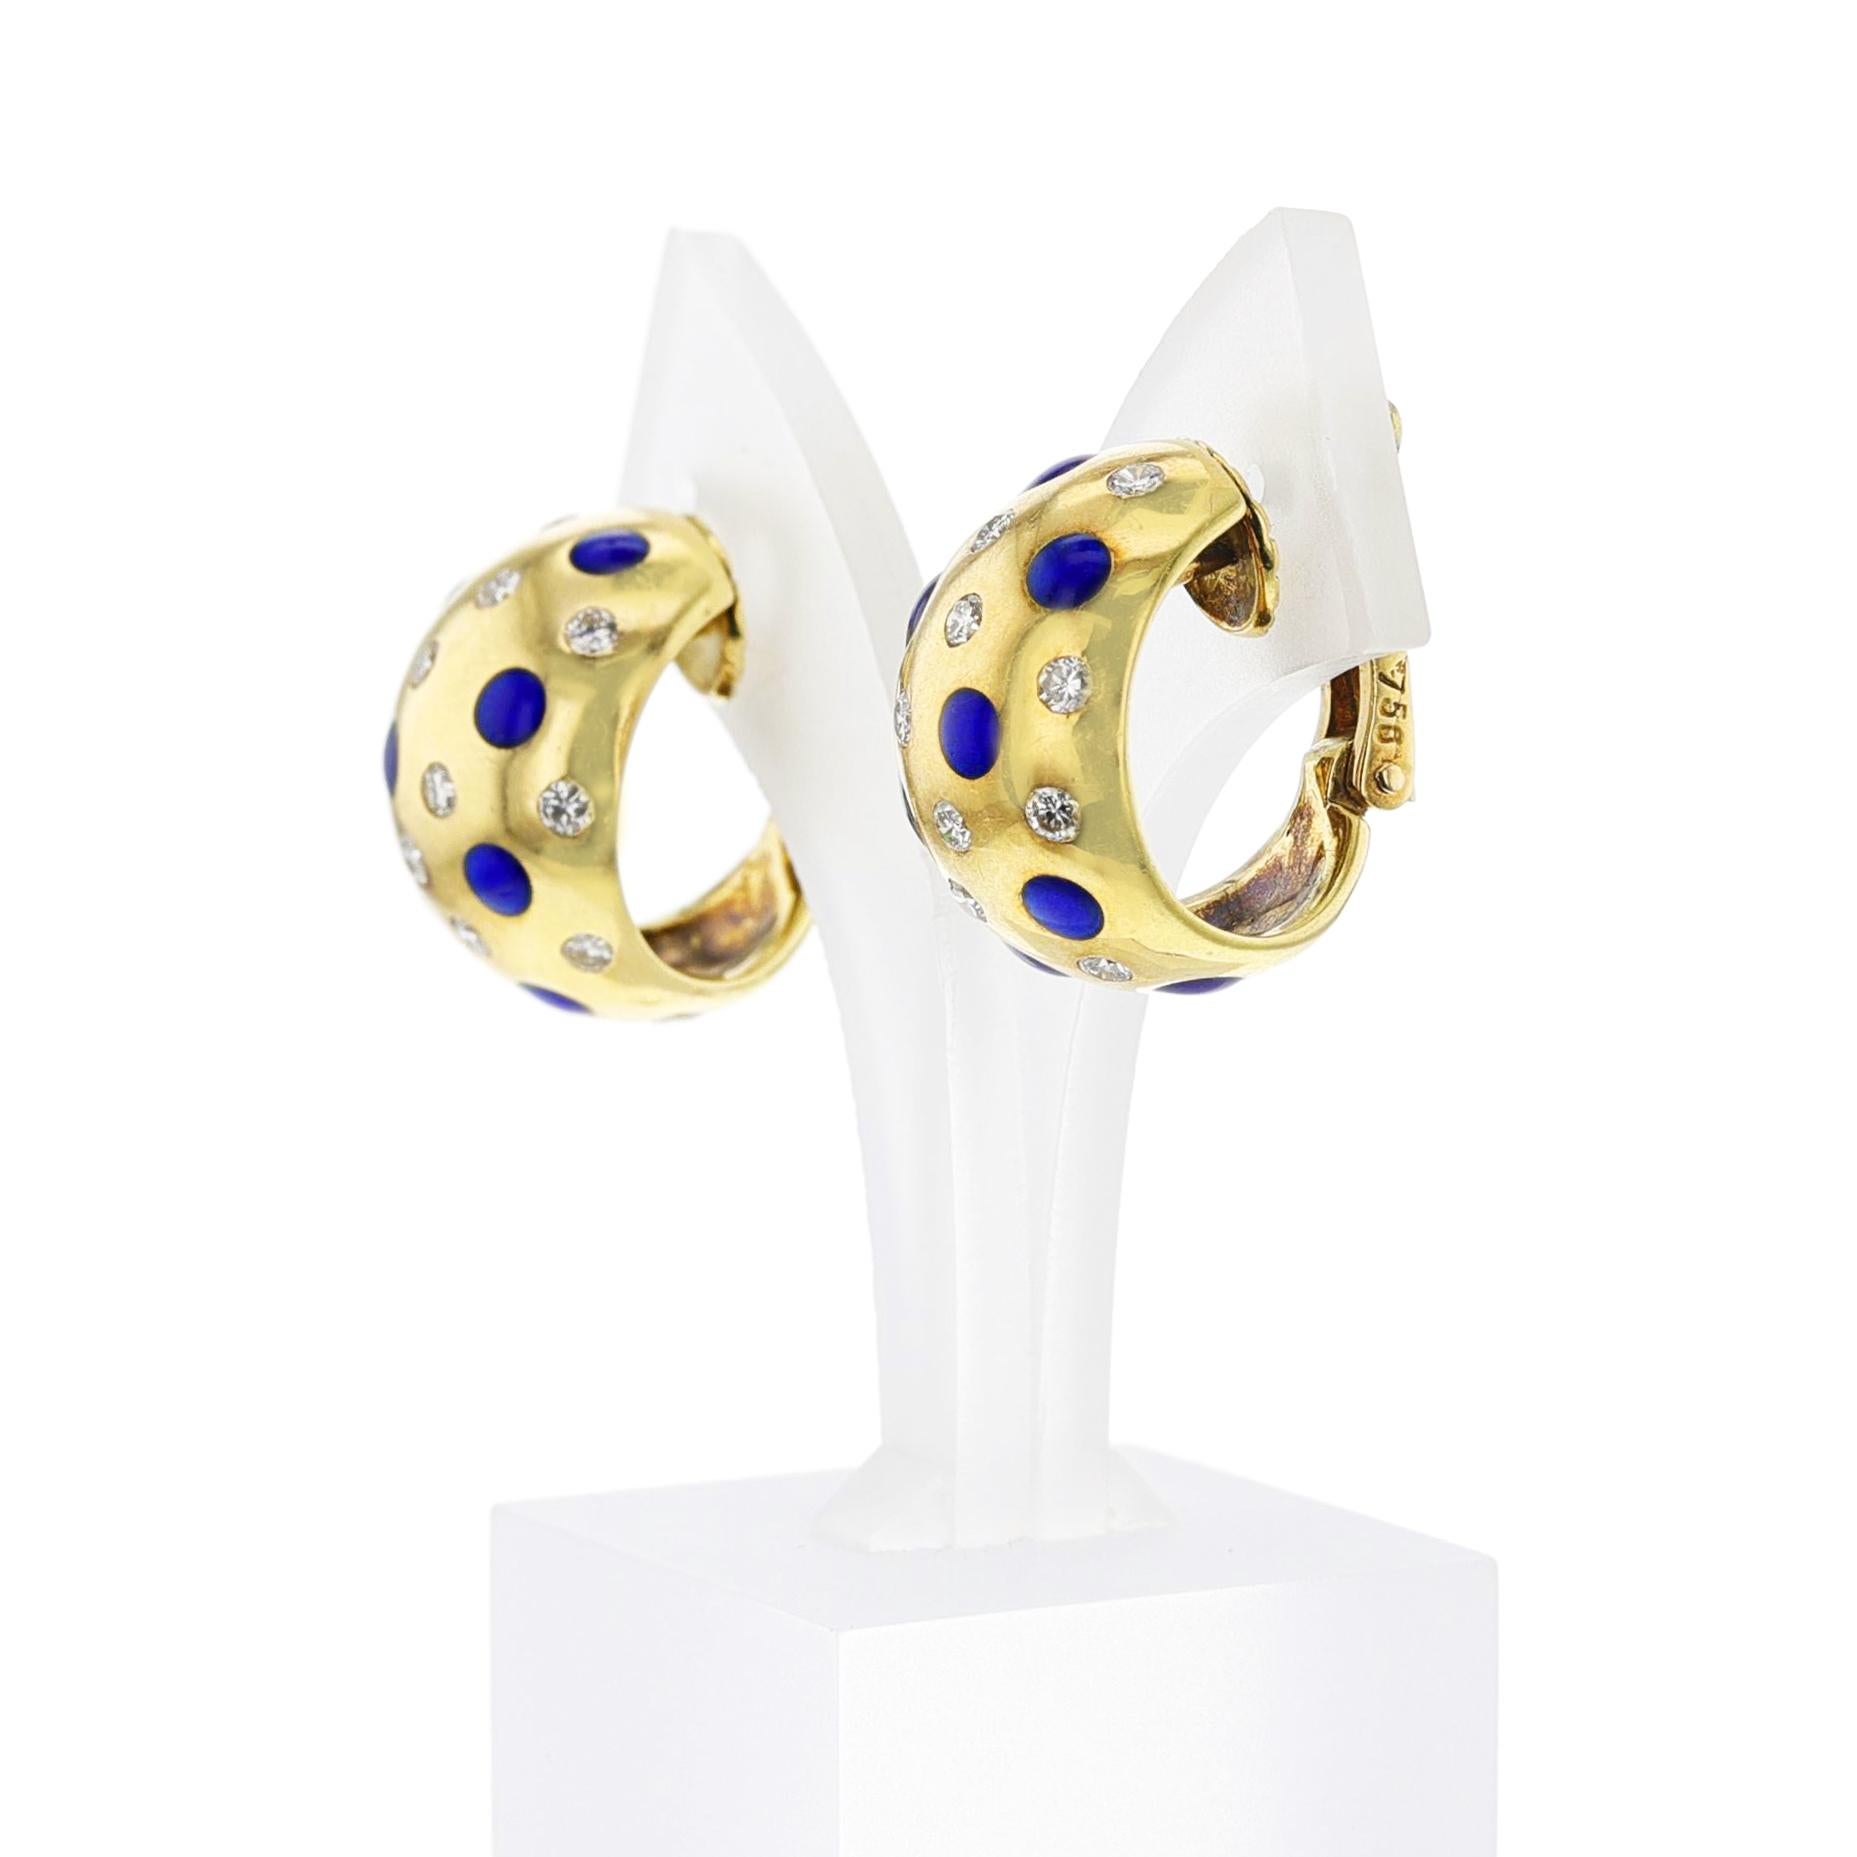 Van Cleef & Arpels Plique a Jour Enamel and Diamond Earring and Ring Set, 18k For Sale 5